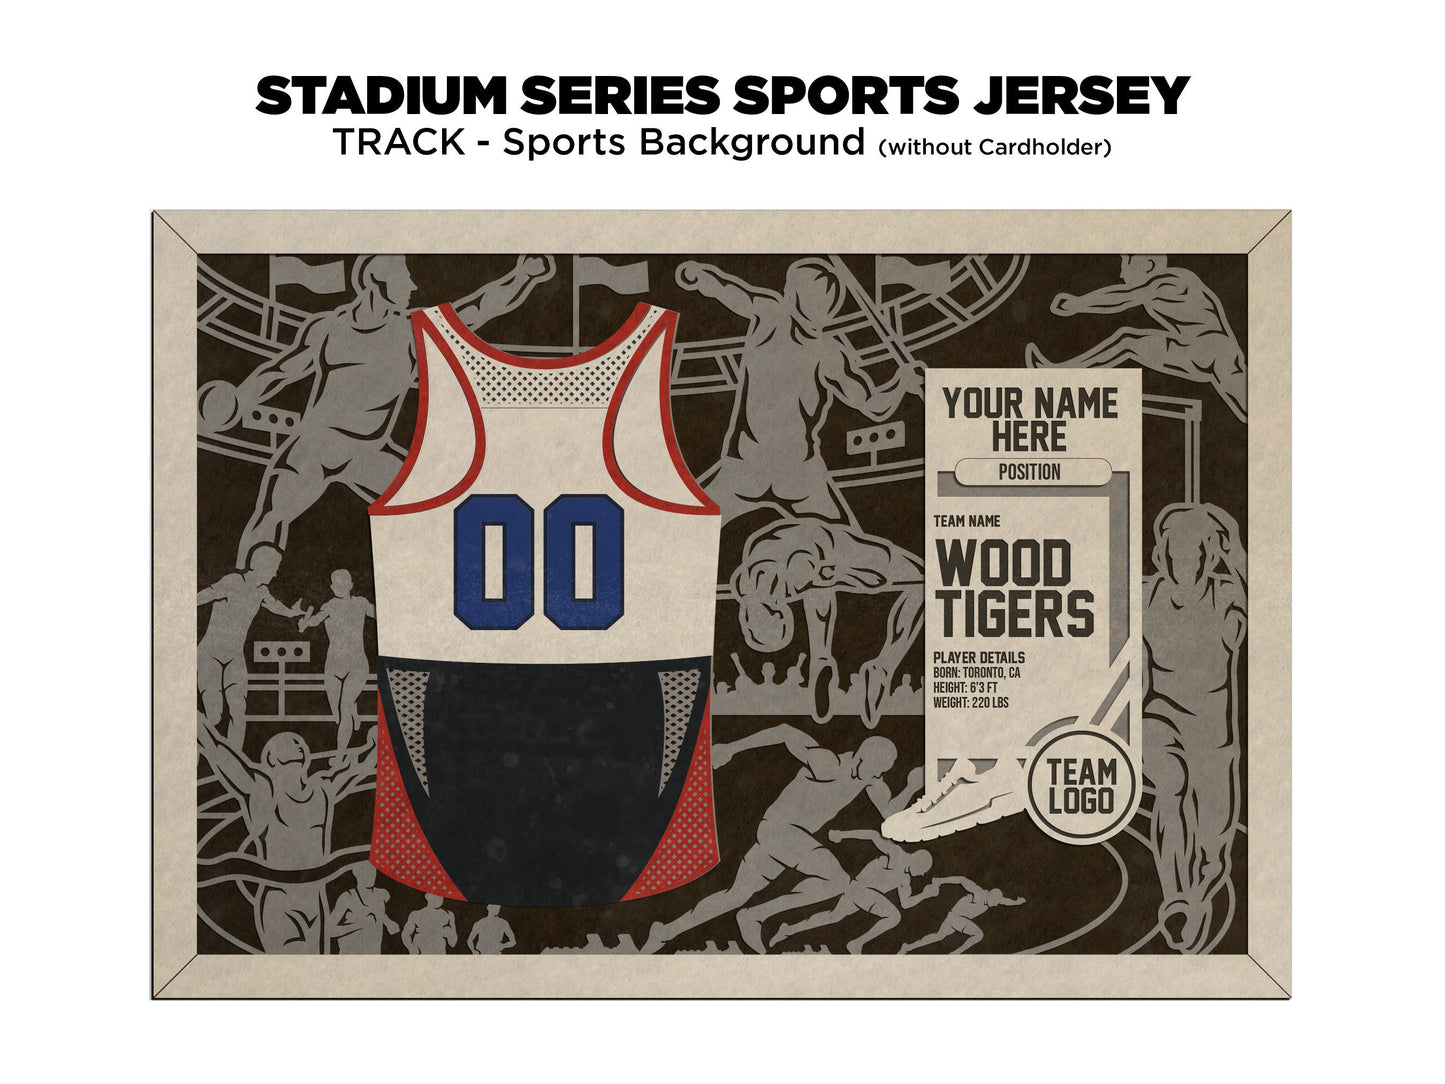 Stadium Series Jerseys - Track and Field - 3 Variations - Male, Female & Alternate Backgrounds - SVG File Download - Sized for Glowforge